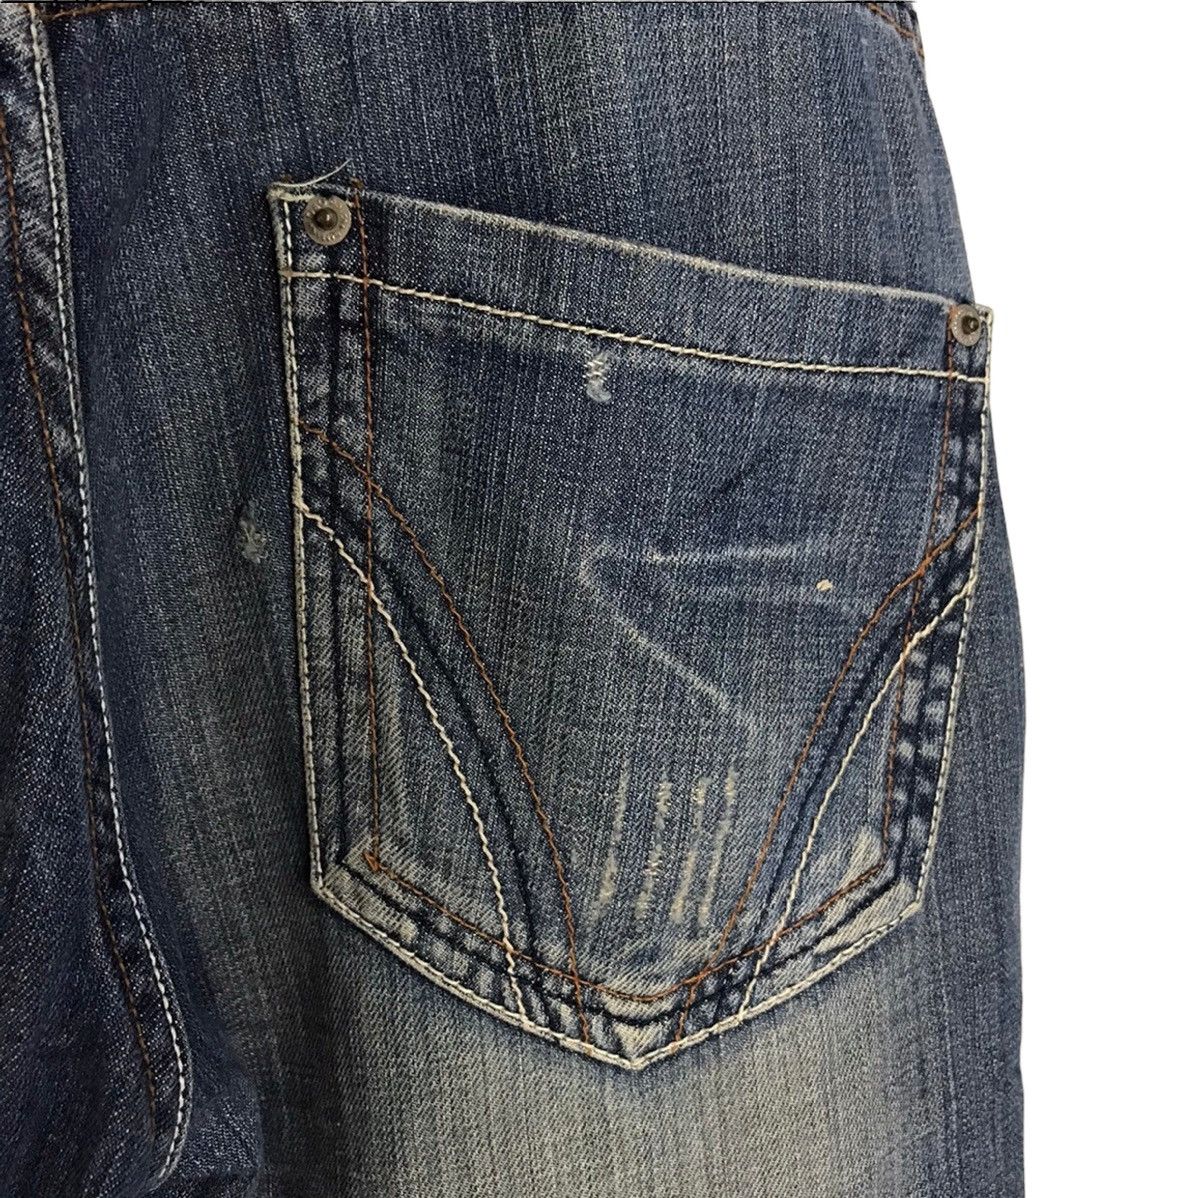 D&G denim pants made in italy - 4